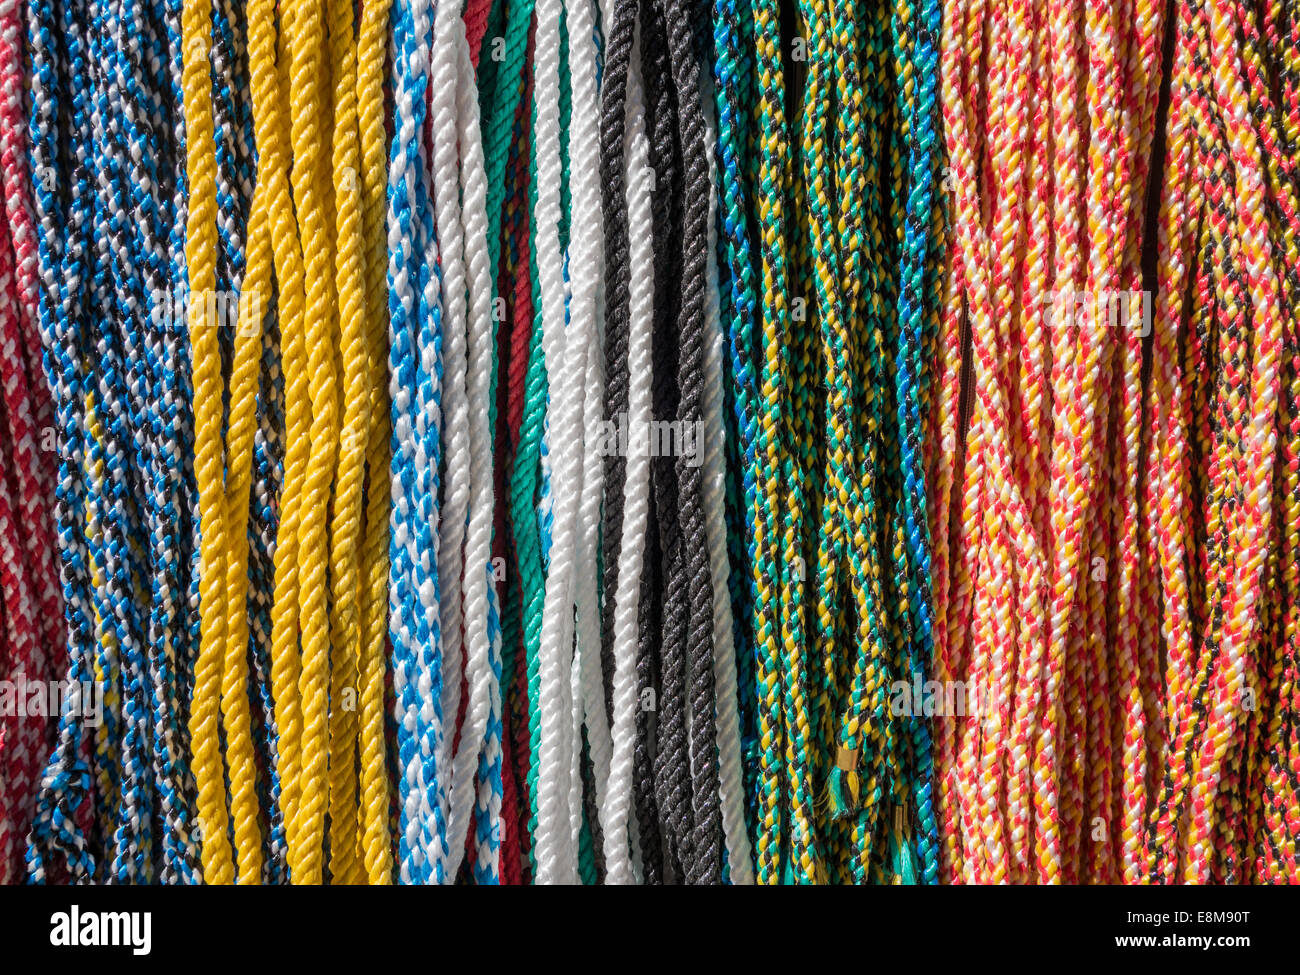 Colored ropes Stock Photo